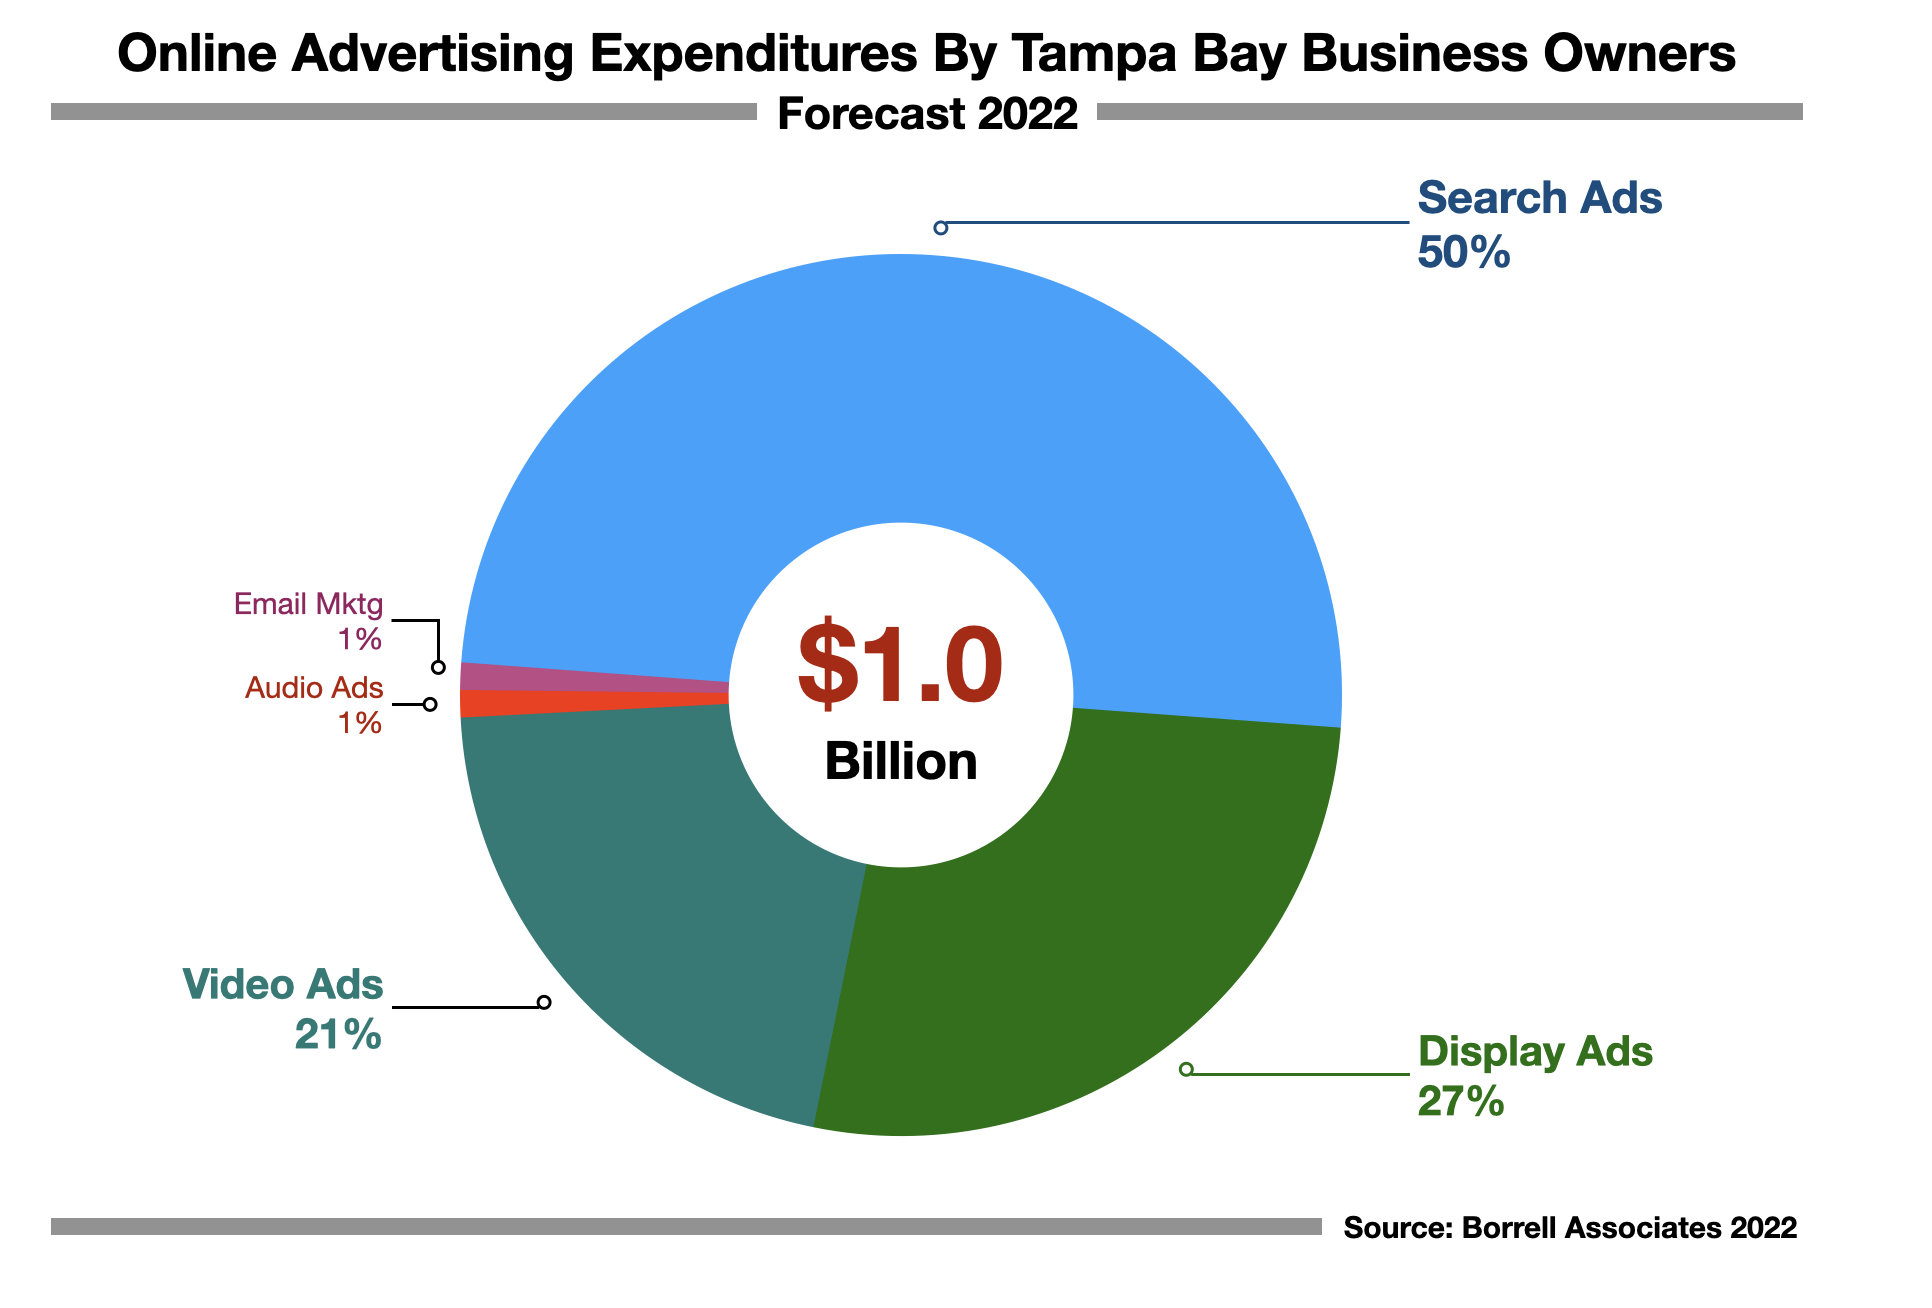 Online Advertising In Tampa Bay: 2022 Forecast